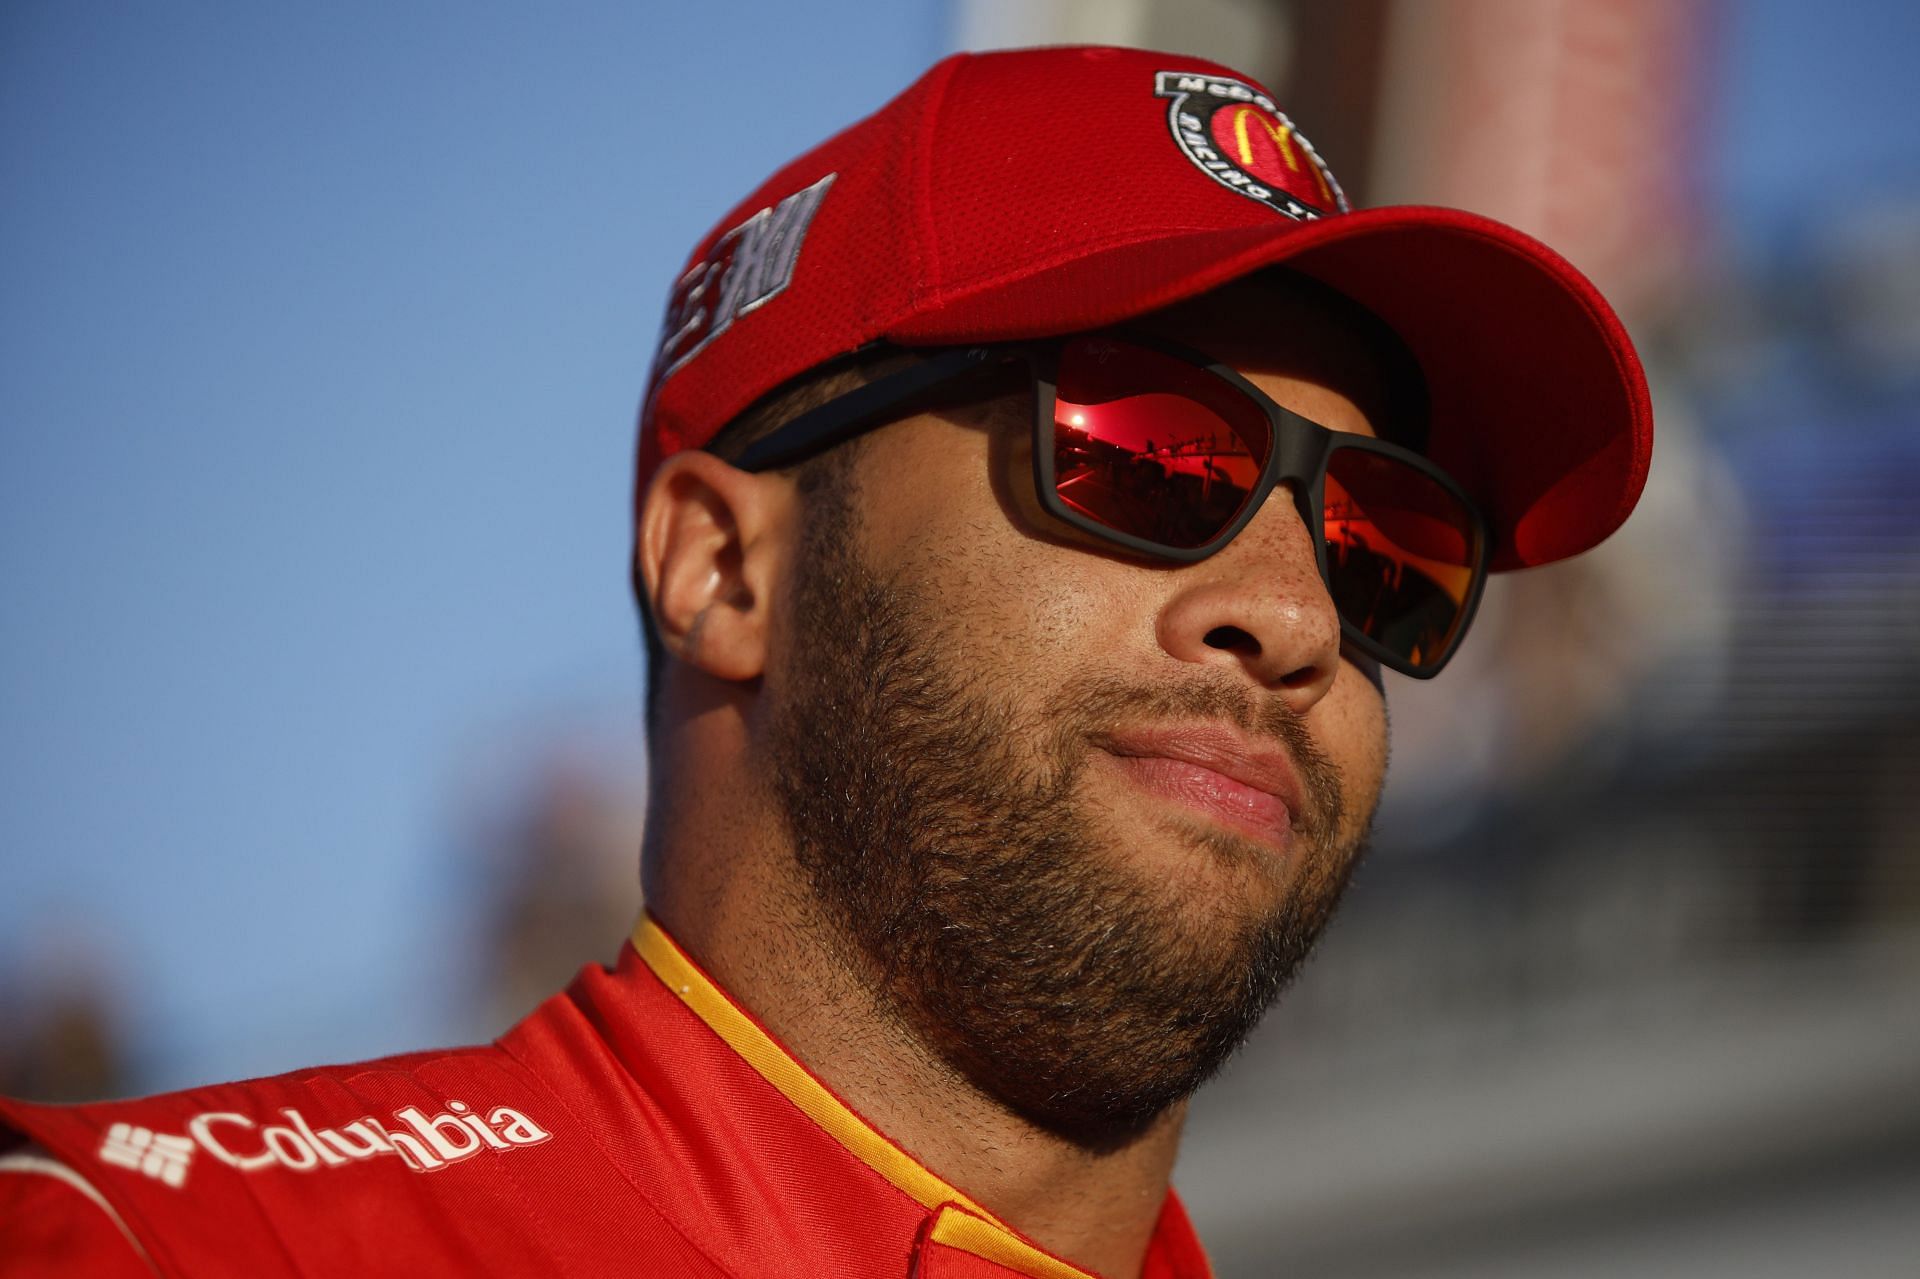 Bubba Wallace attends practice for NASCAR Cup Series 64th Annual Daytona 500 (Photo by Sean Gardner/Getty Images)